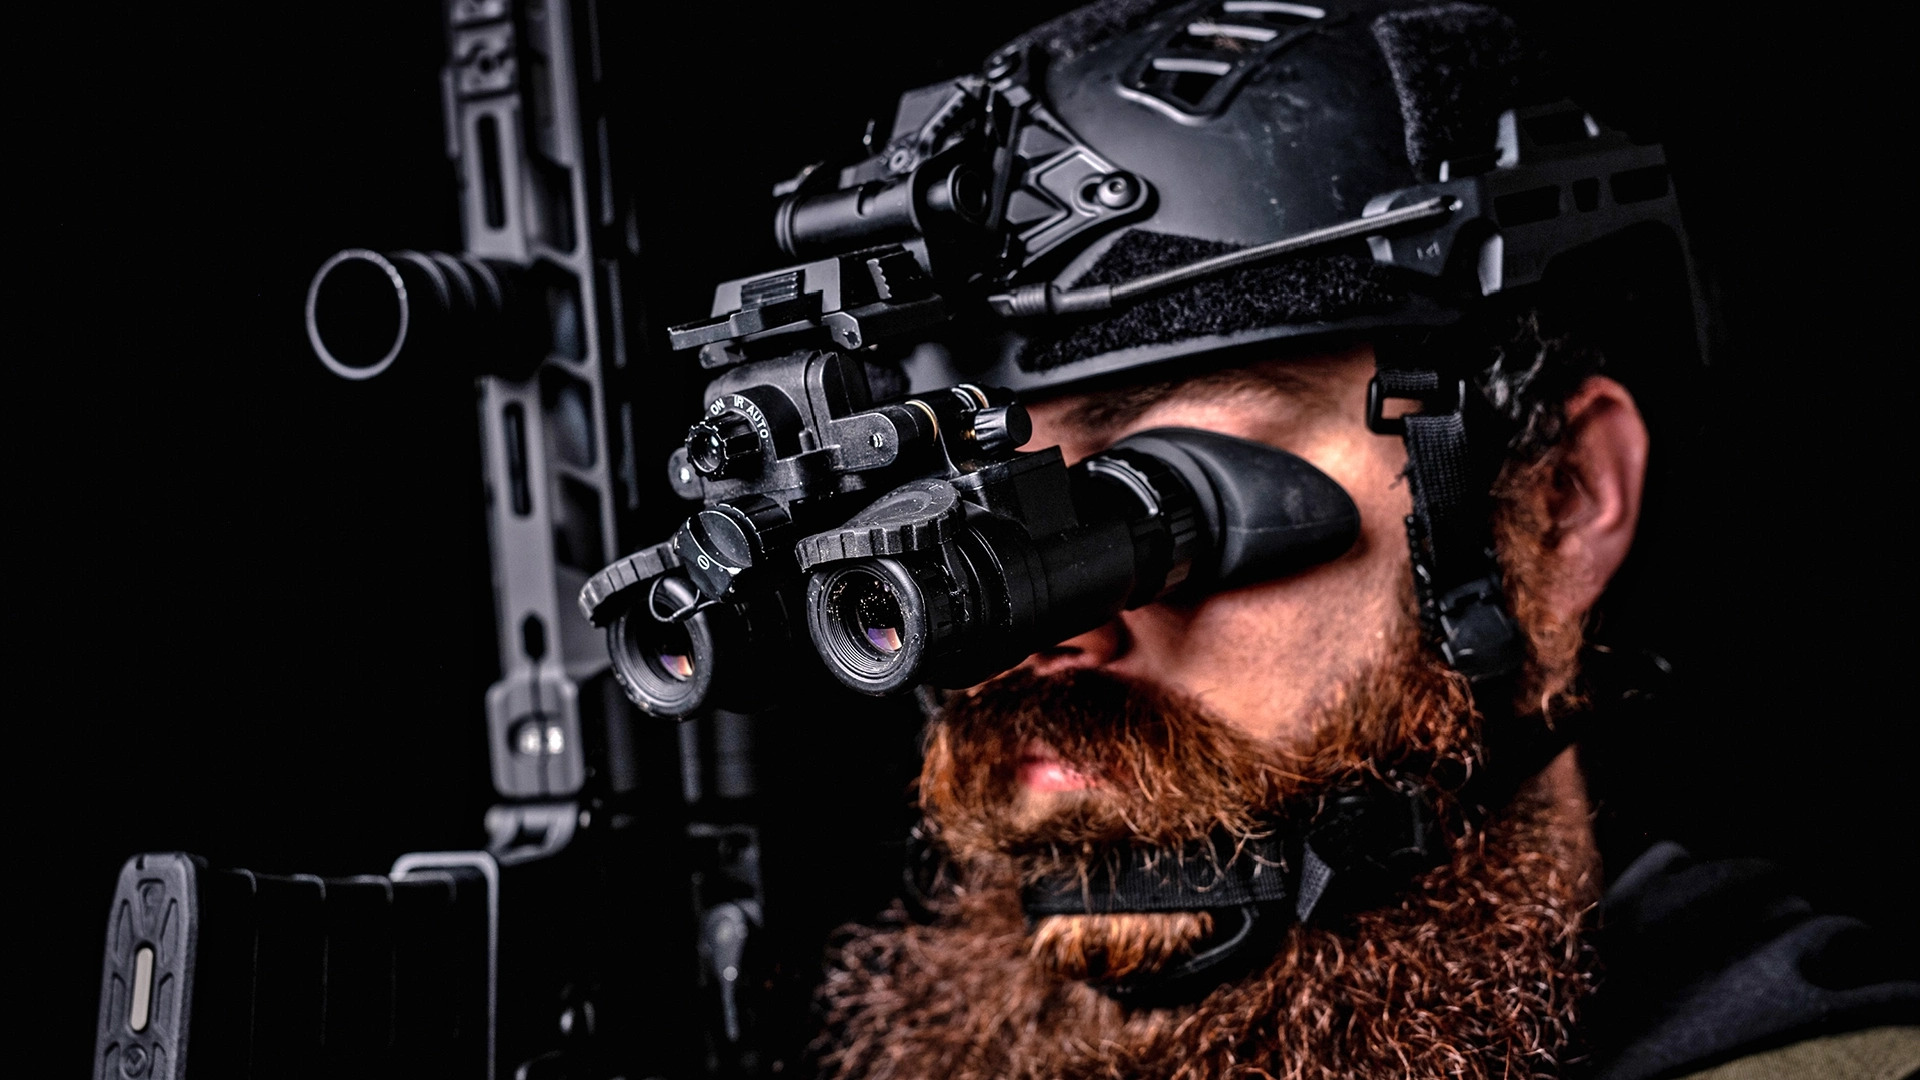 https://www.atncorp.com/images/pages/night-vision-technology/hnvw_1.jpg